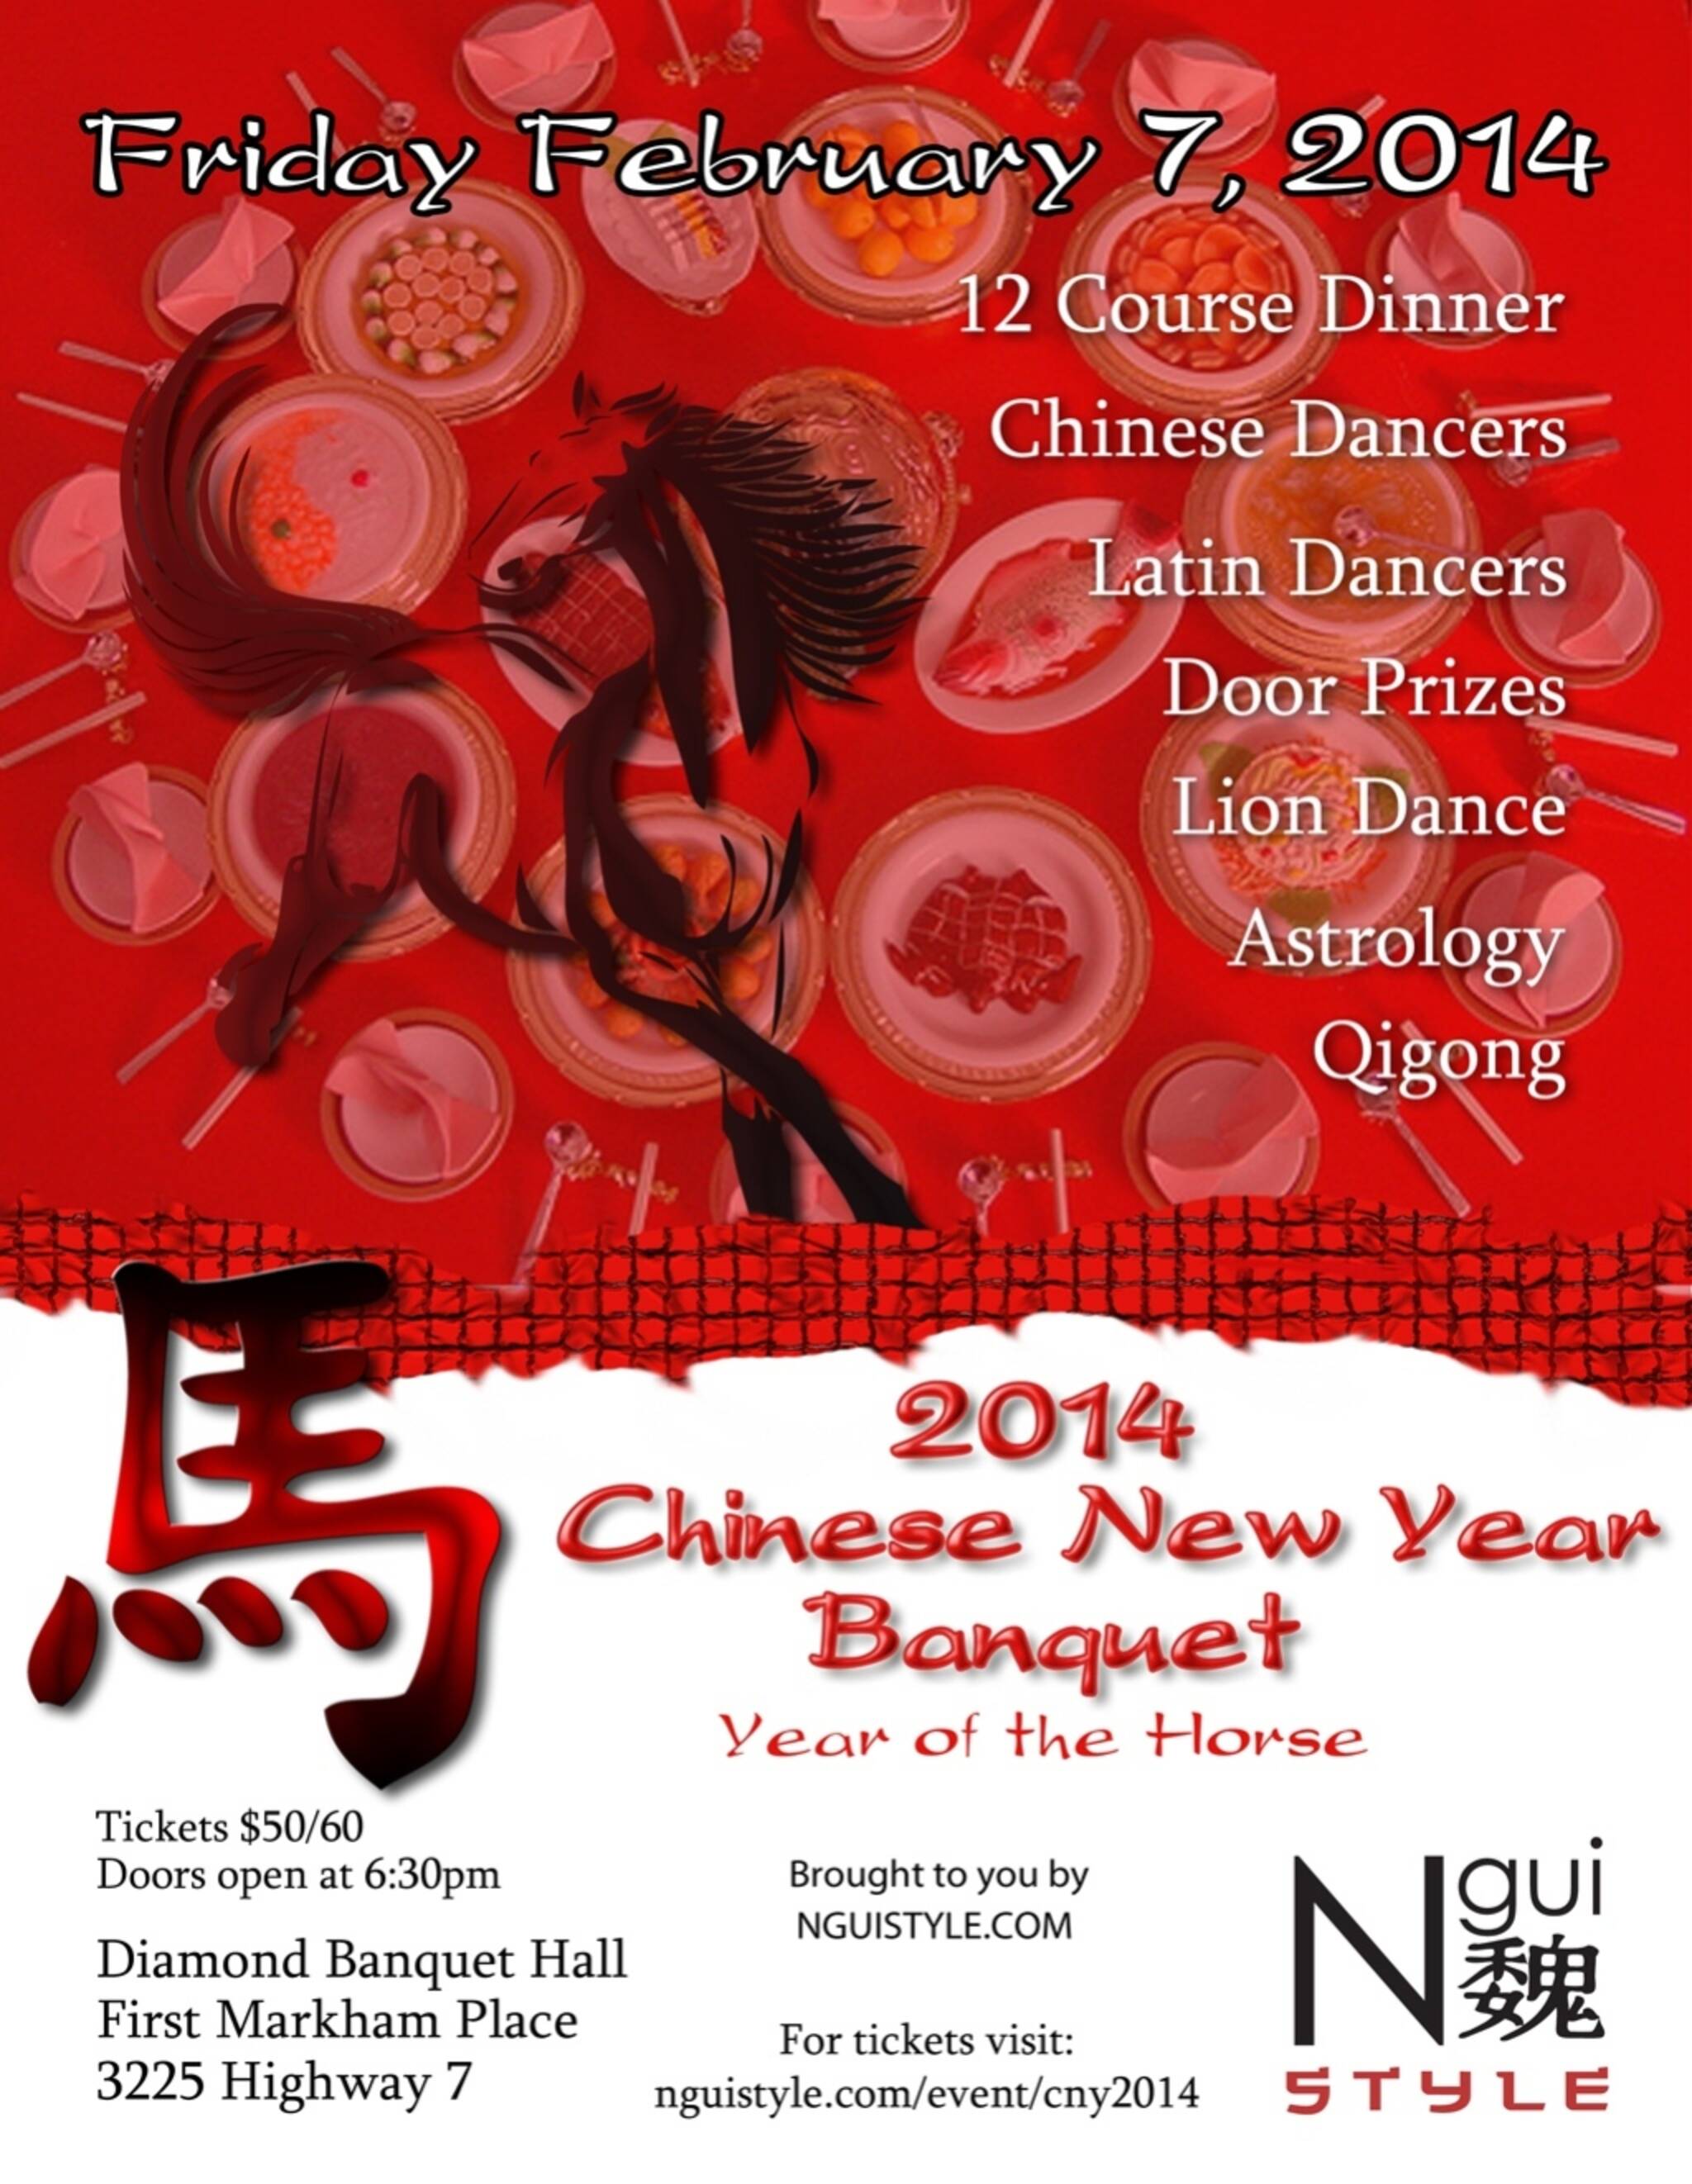 Chinese New Year Banquet 2014